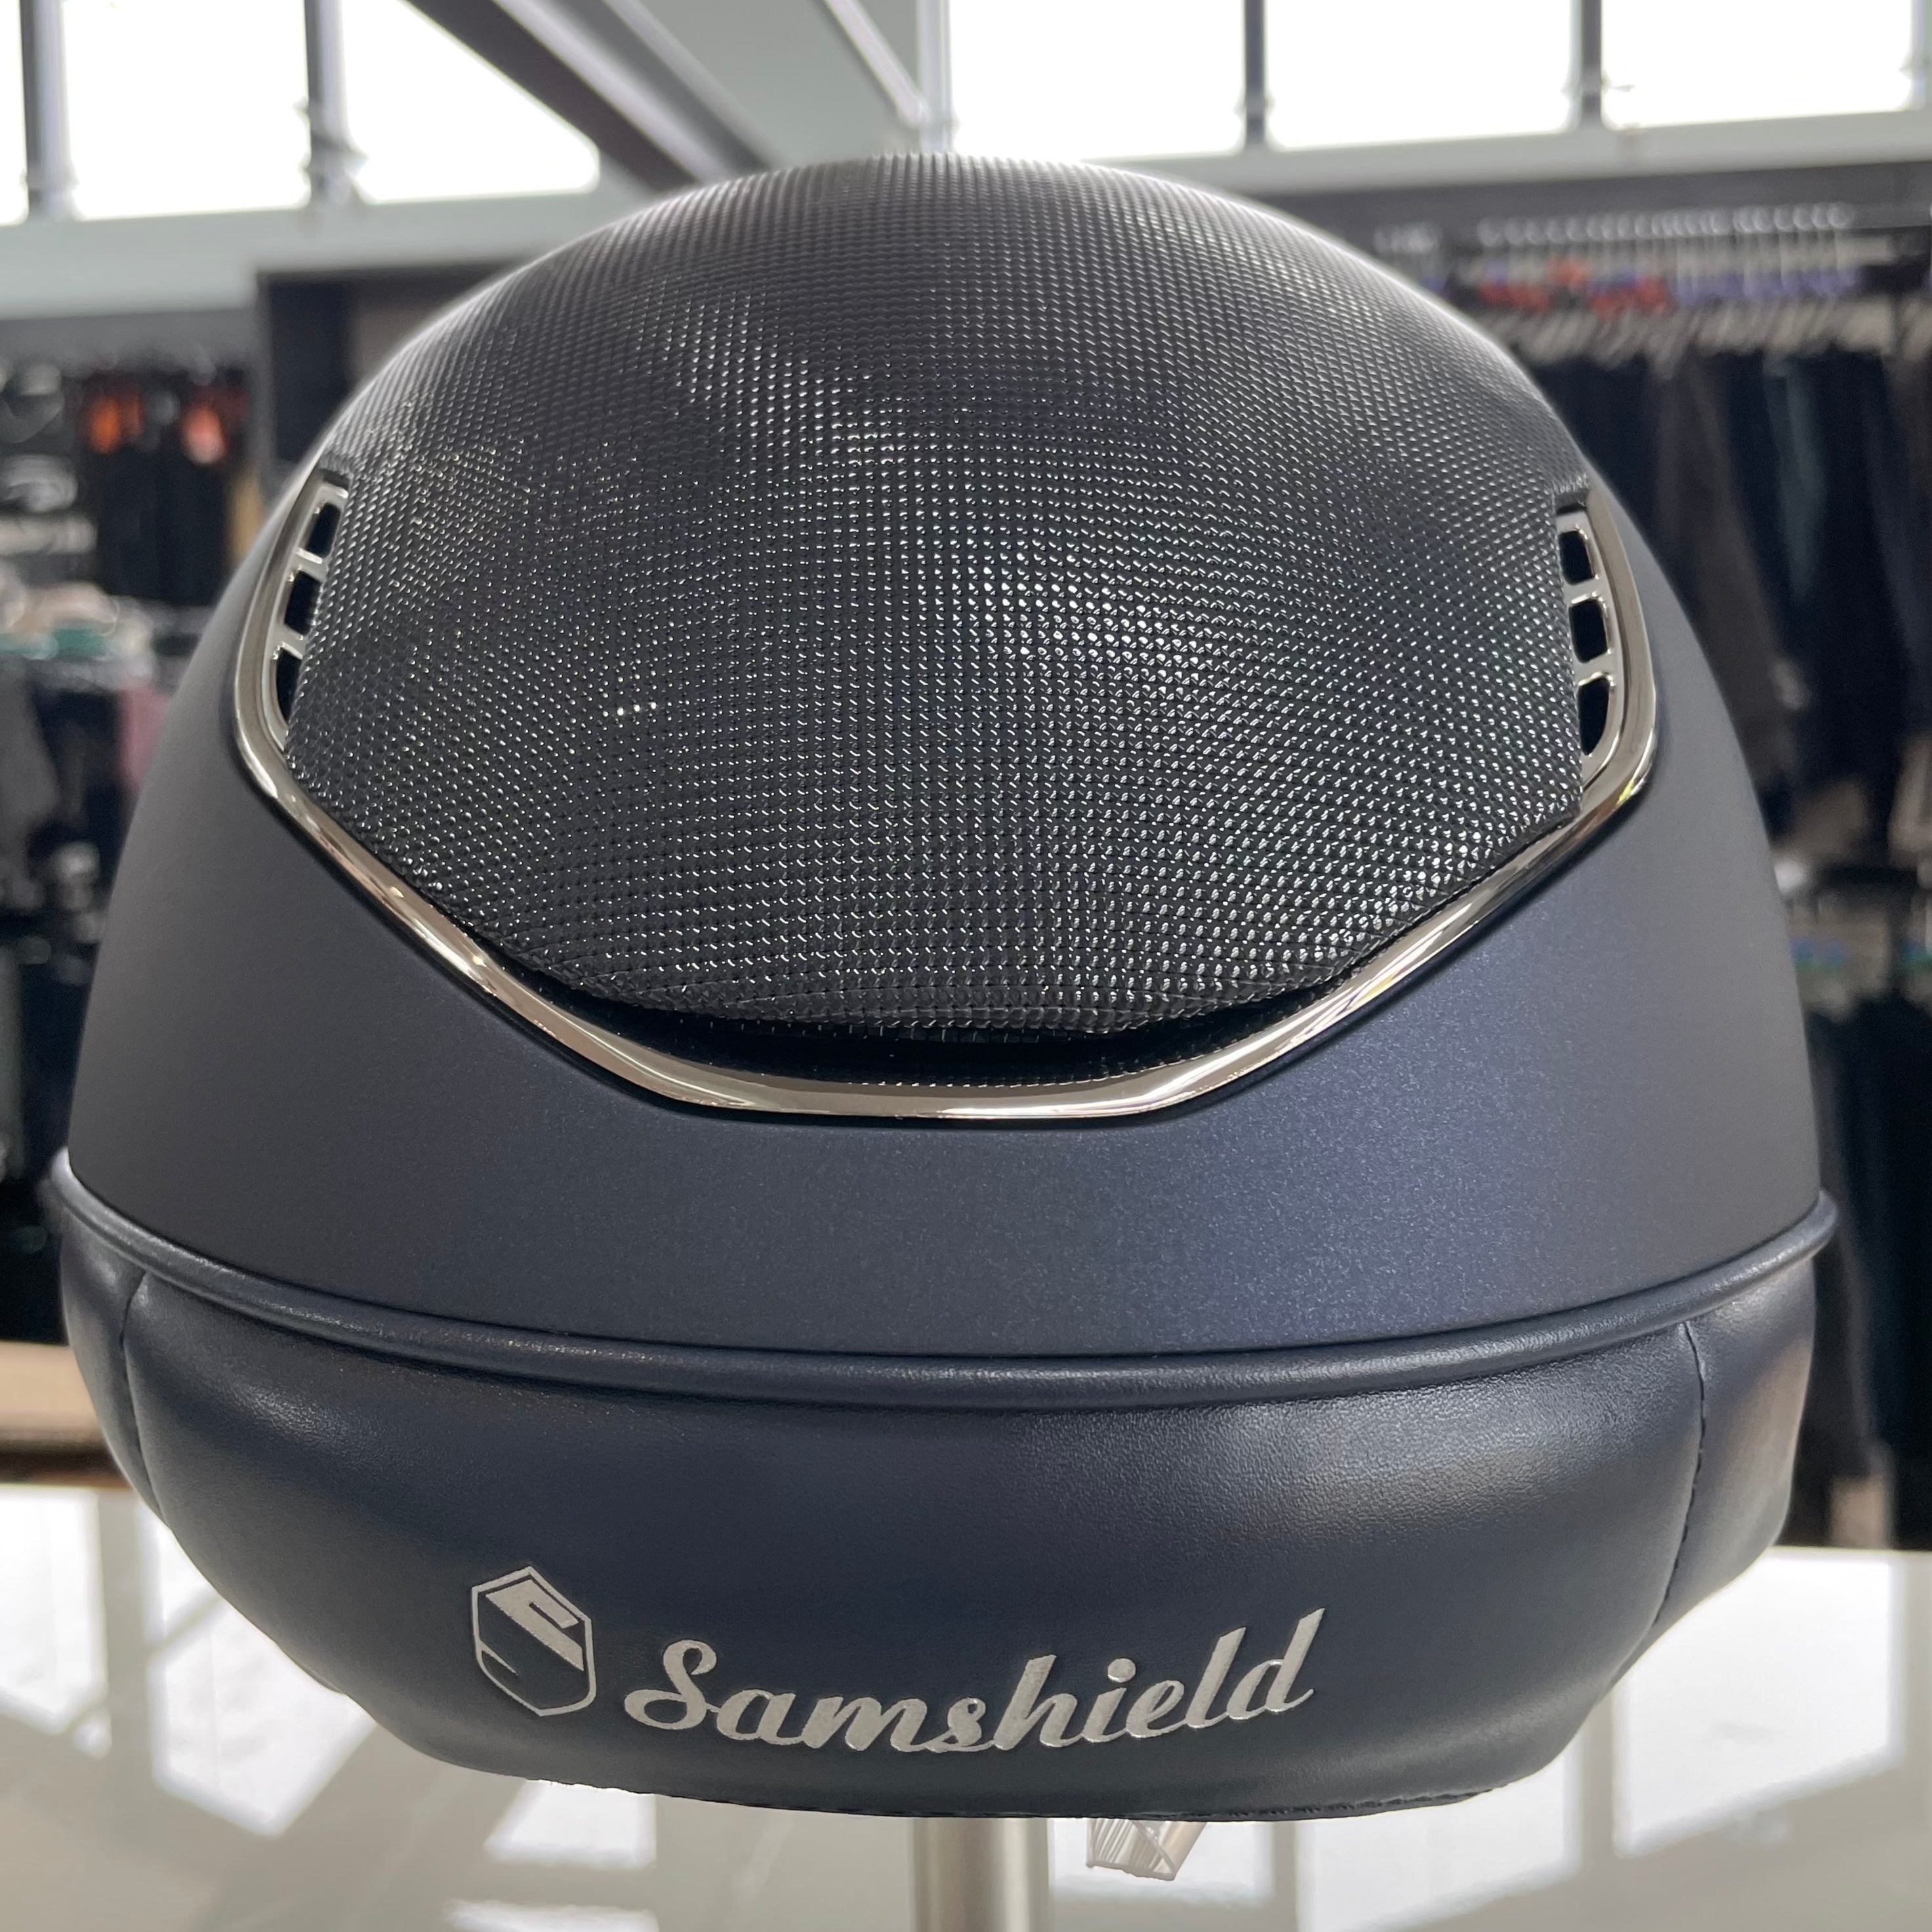 Samshield MissShield 2.0 Blue with Black chrome and shimmer top and frontal band M- in stock and ready to ship!